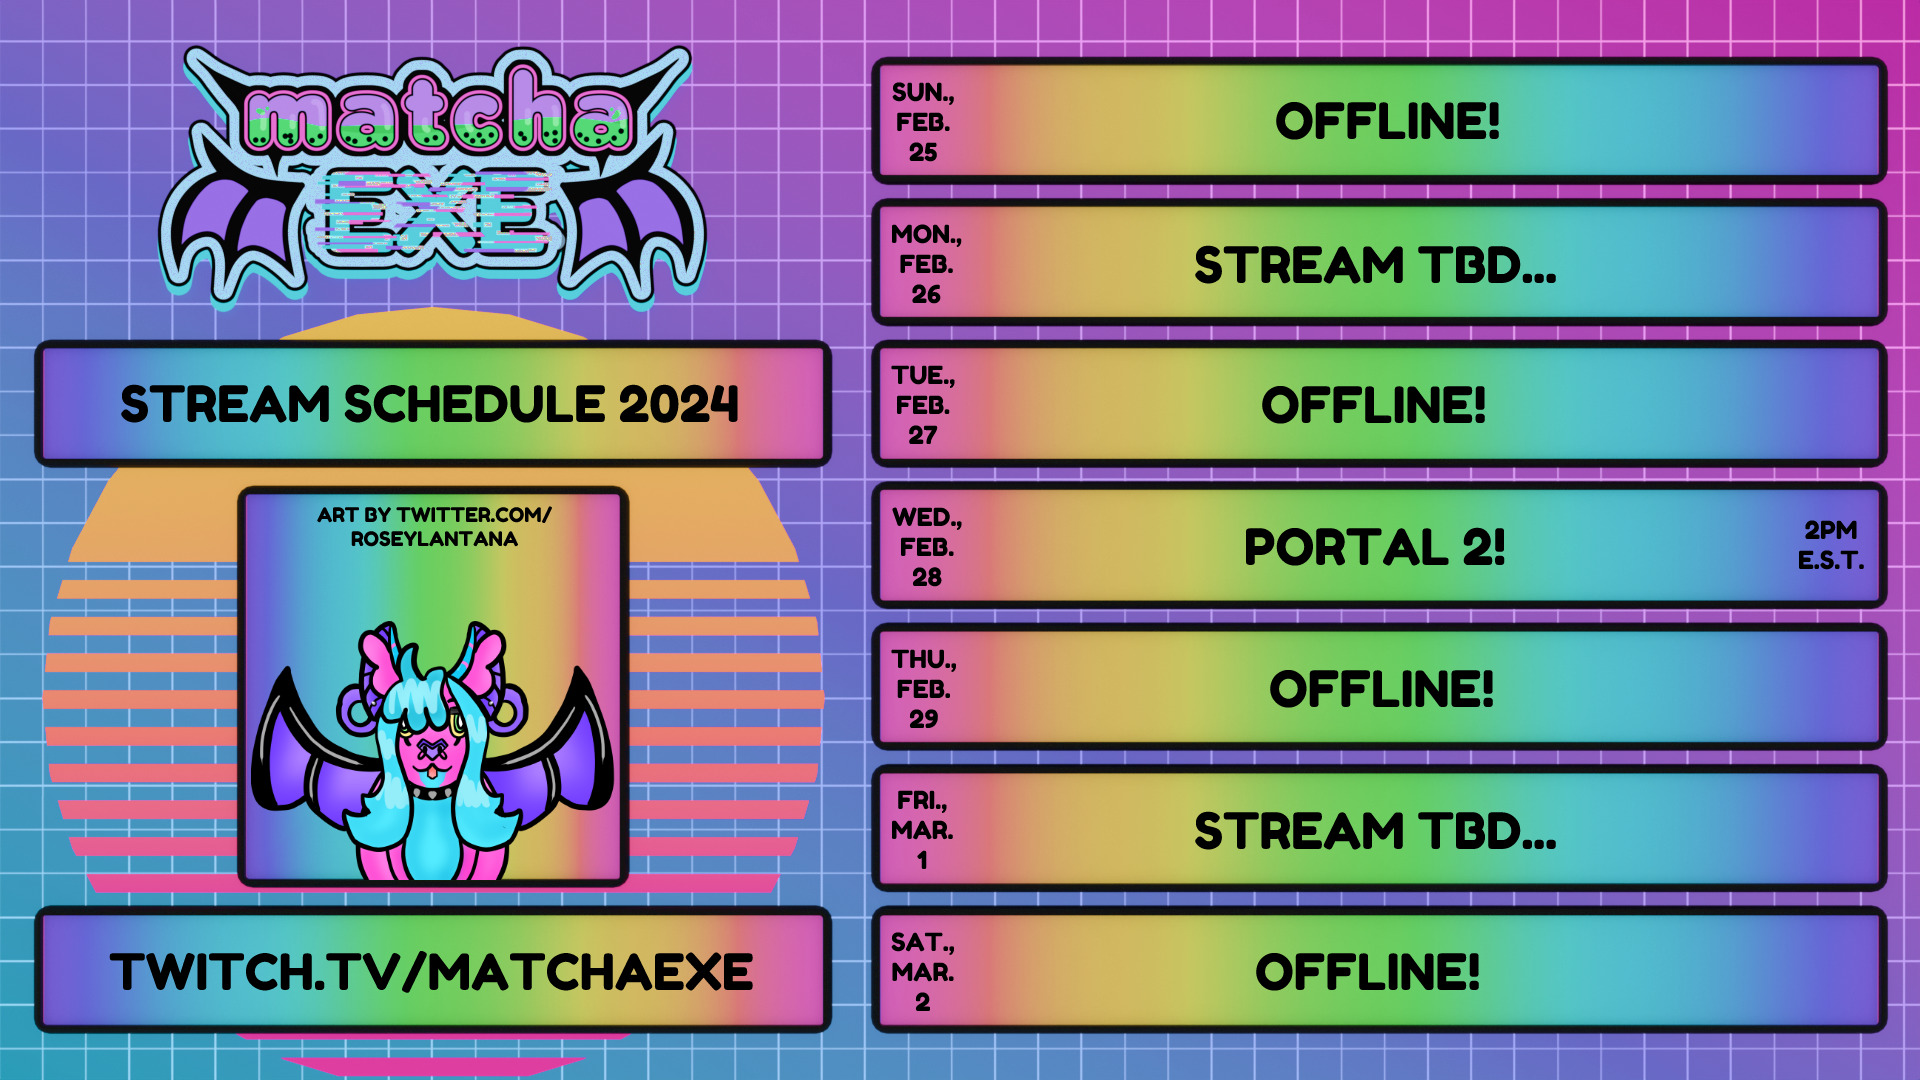 stream schedule for February 25 - March 2, 2024!